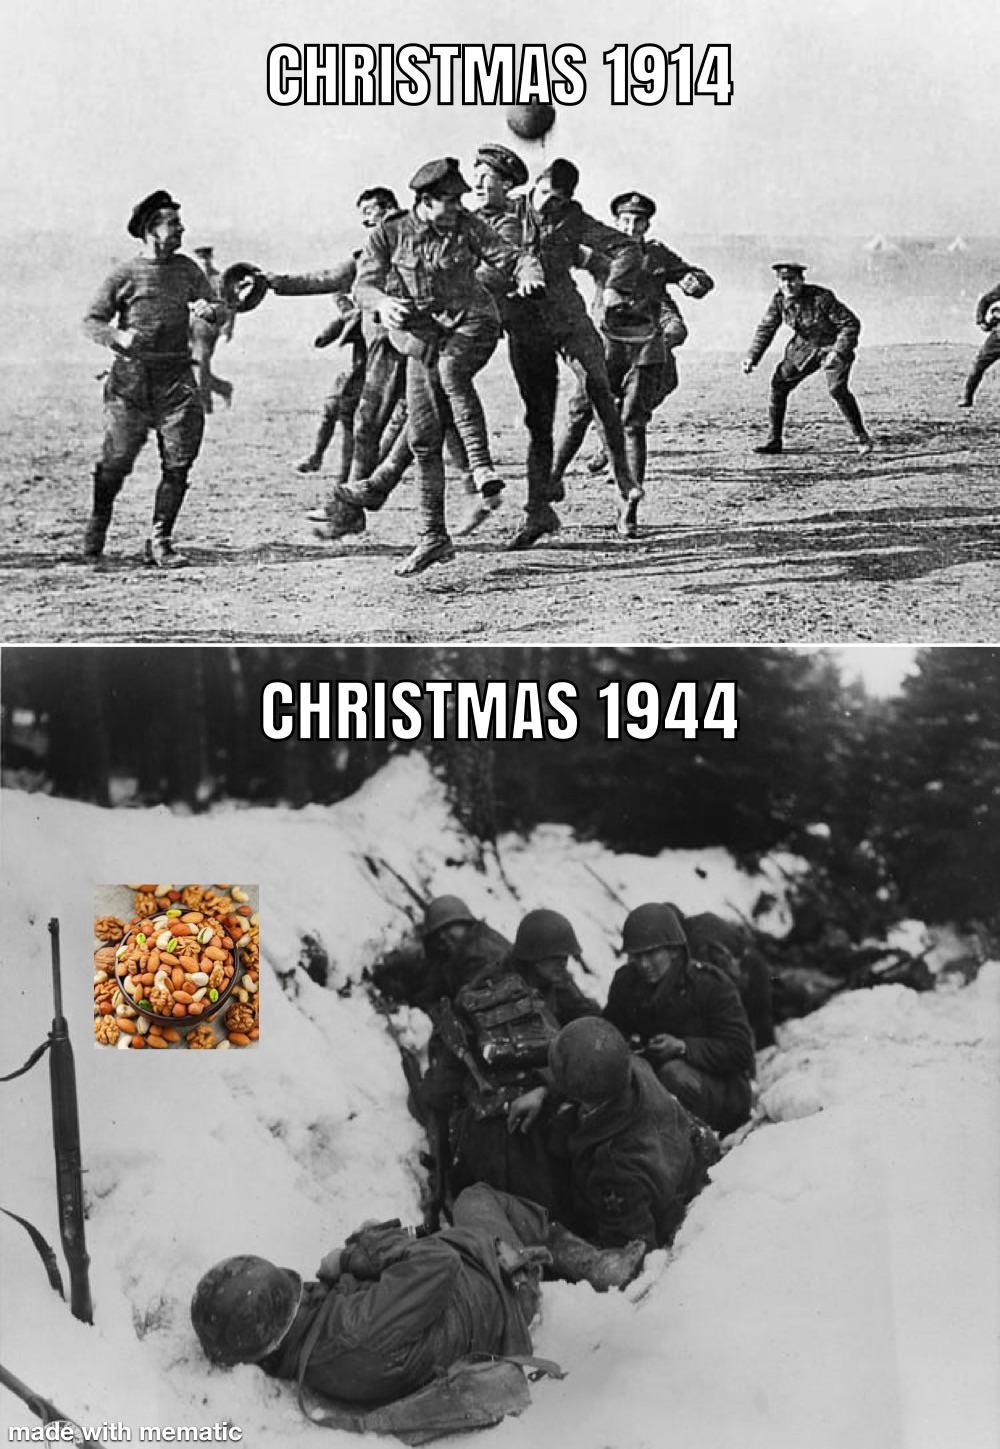 Went from “We were all brothers” to “Facing their forces alone” real quick. Happy holidays!